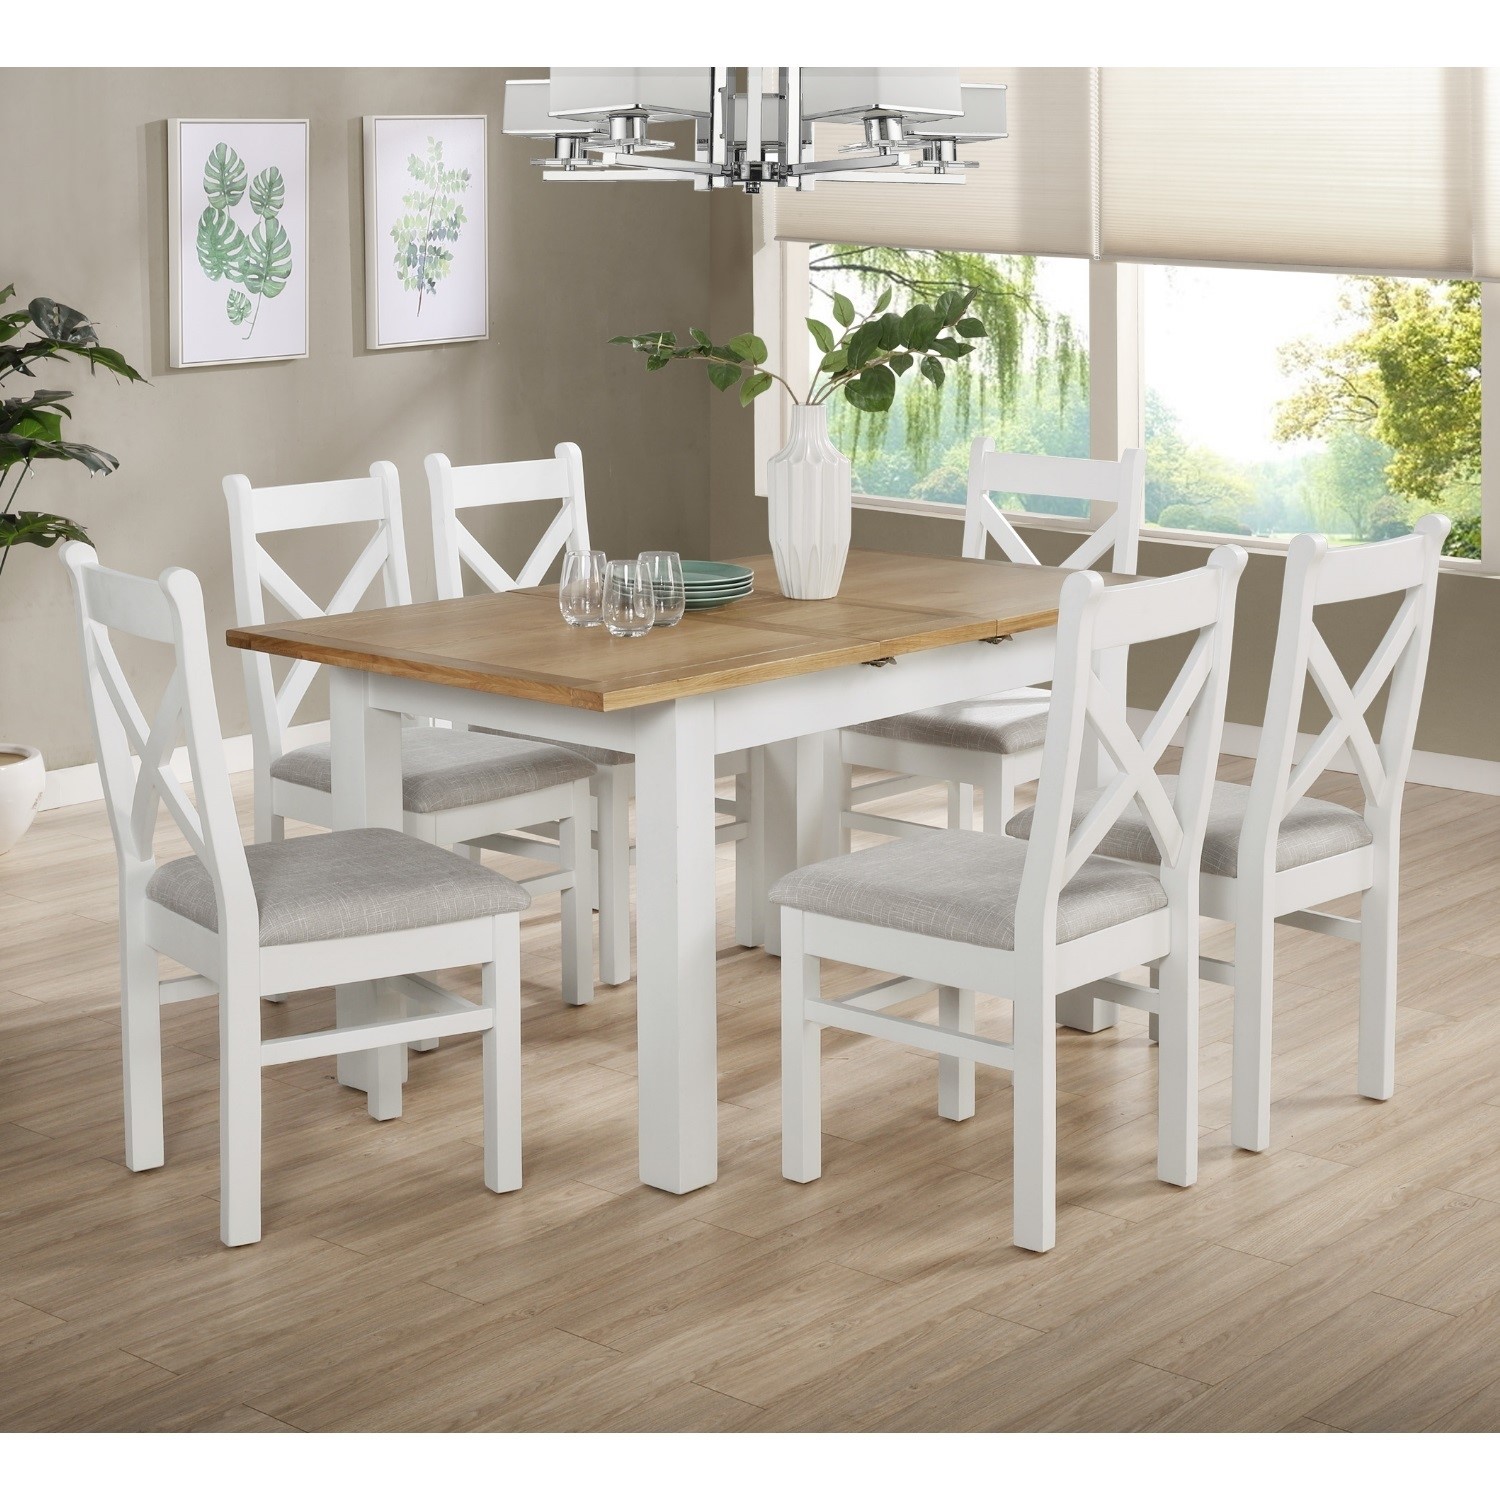 White Oak Extendable Dining Set With 6 White Dining Chairs